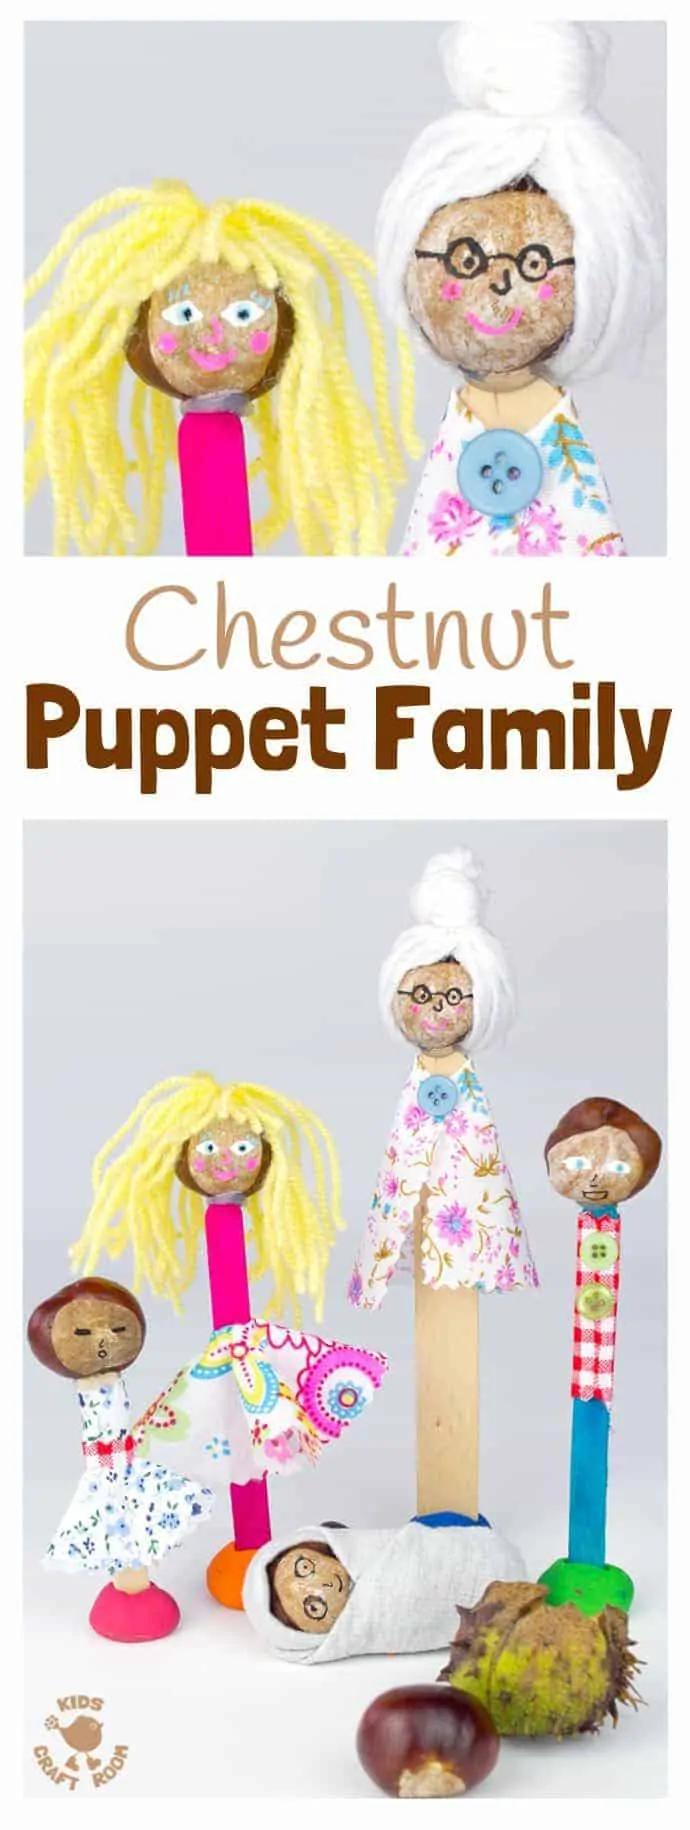 HOMEMADE PUPPETS CHESTNUT CRAFT - Make a Puppet Family with this fun and creative chestnut craft for kids. Chestnut puppets give kids hours of imaginative play & story telling. (buckeye craft/ conker craft)